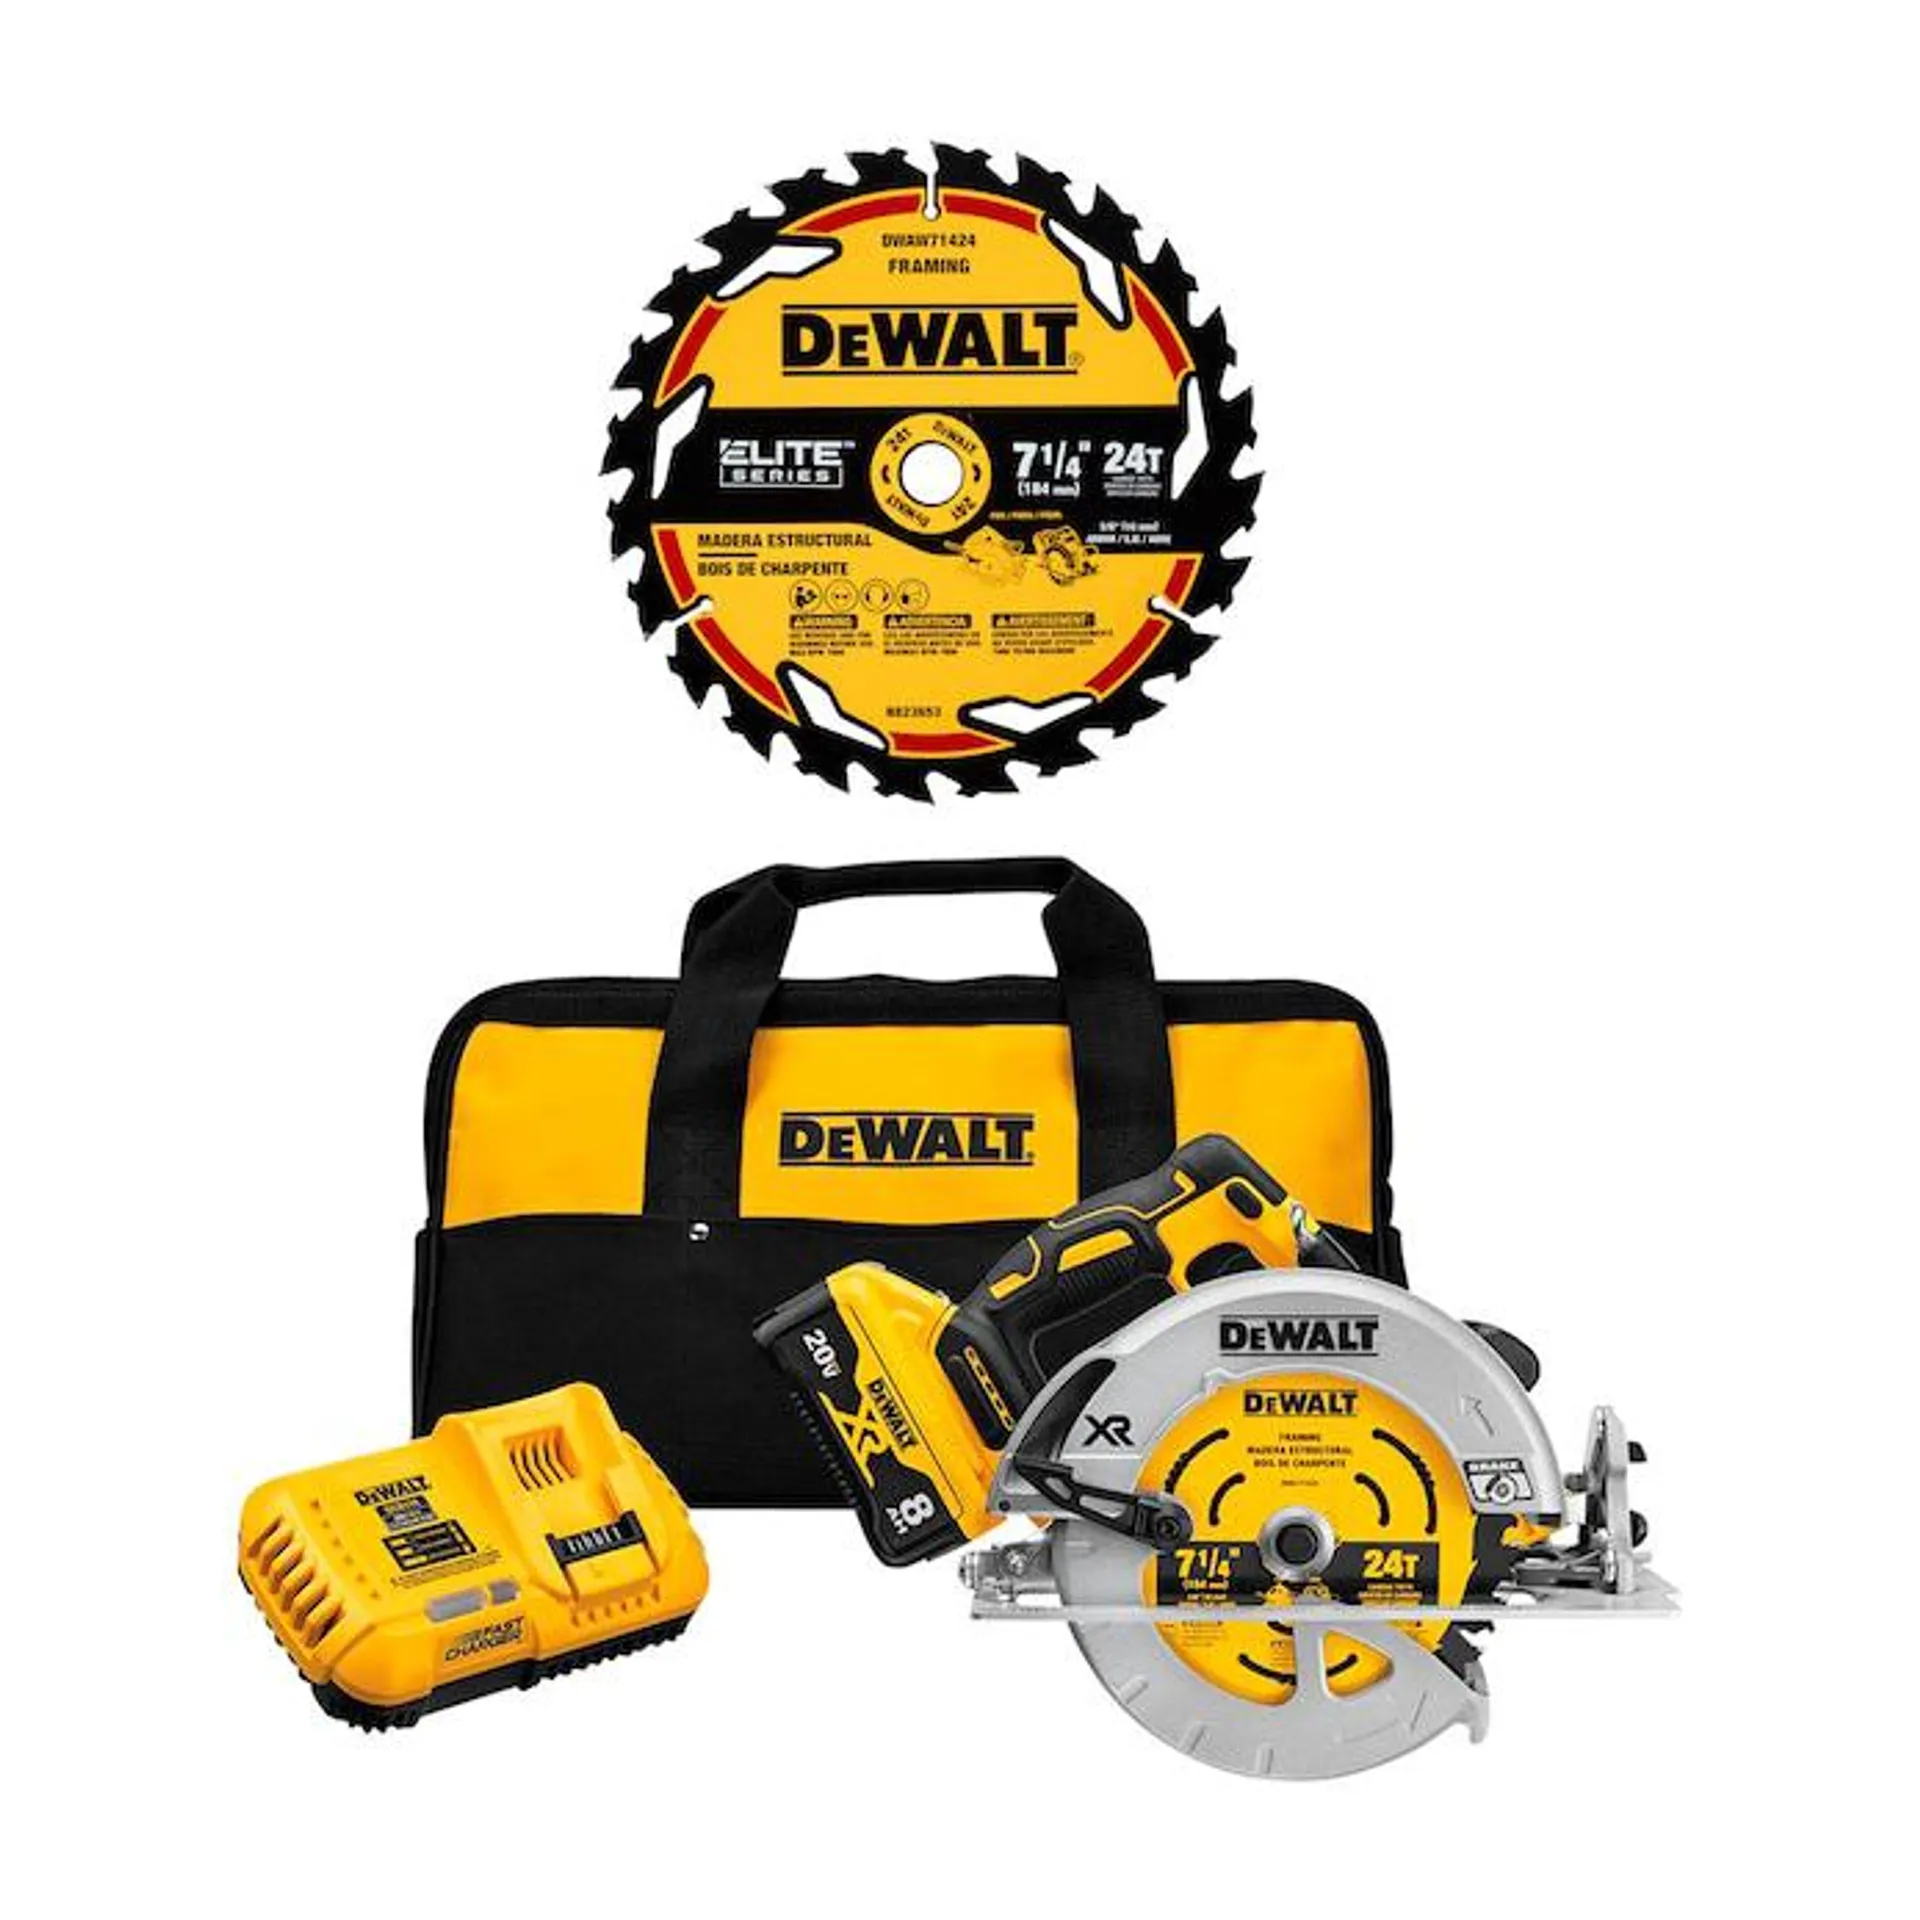 DEWALT XR POWER DETECT 20-Volt Max 7-1/4-in Brushless Cordless Circular Saw (1-Battery and Charger Included) & ELITE SERIES 7-1/4-in 24-Tooth Tungsten Carbide-tipped Steel Circular Saw Blade